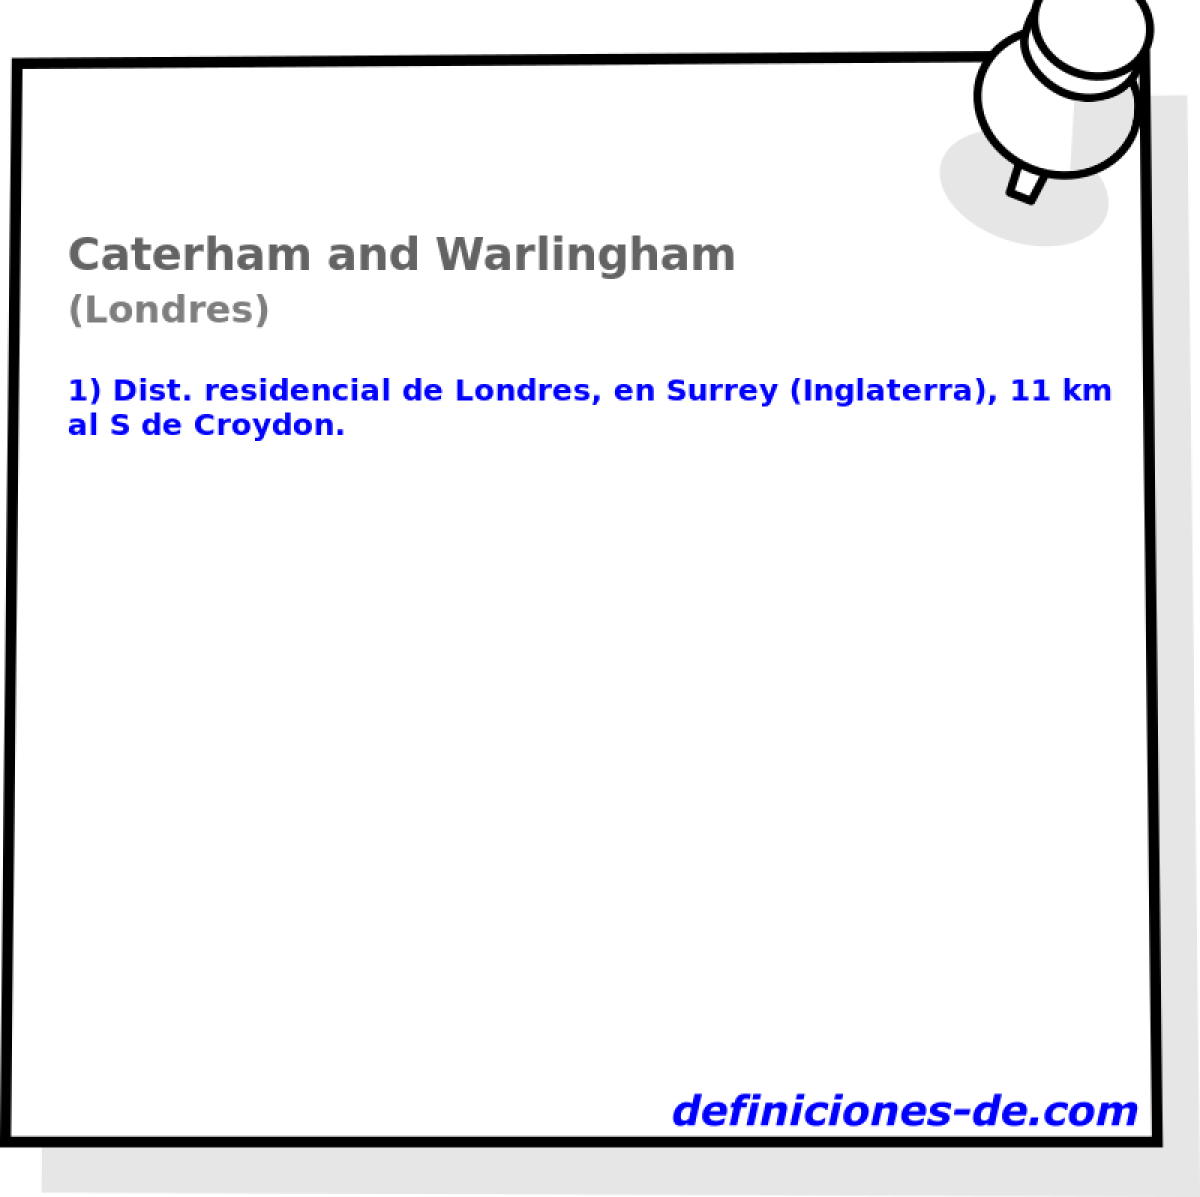 Caterham and Warlingham (Londres)